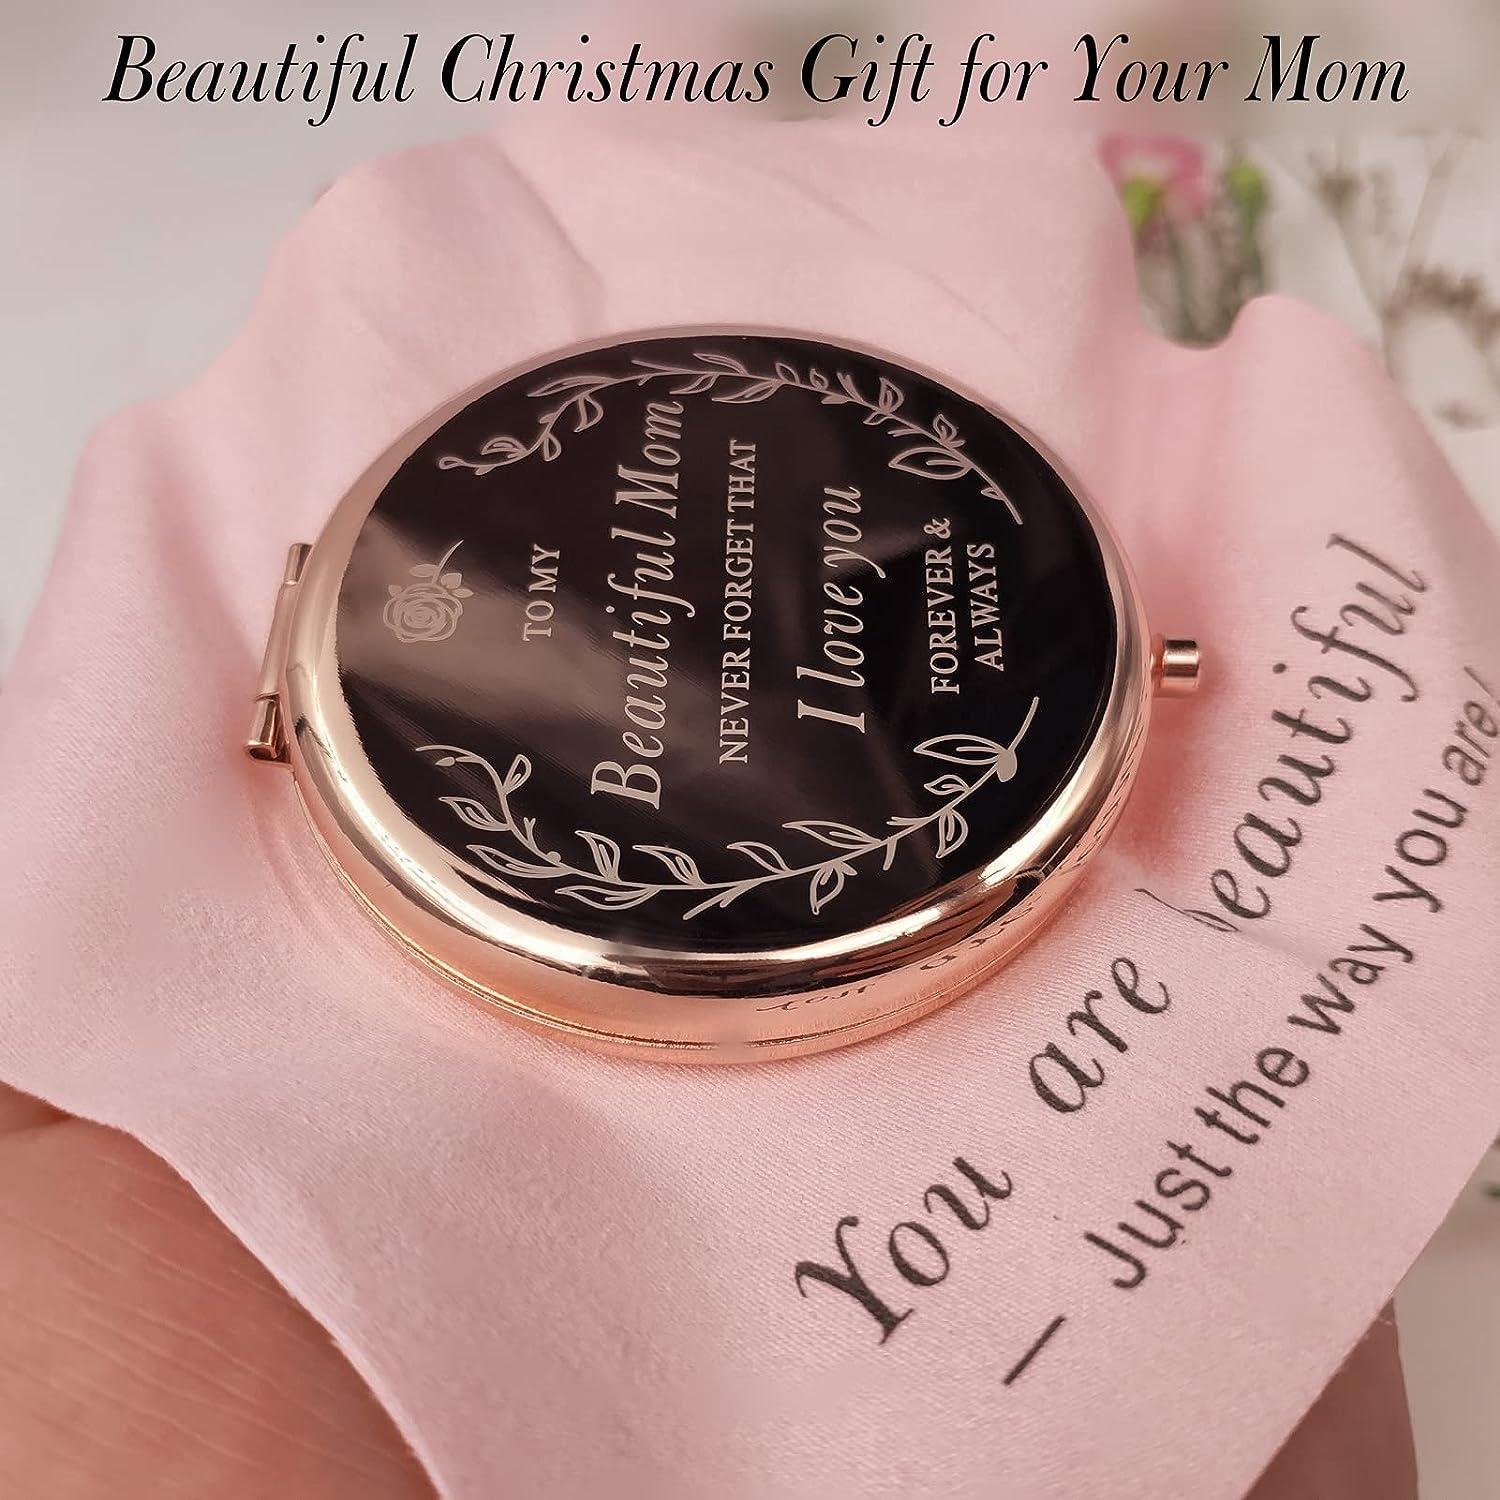 Personalized Gifts for Mom- Best Unique Gift Ideas for Mom to Surprise Her